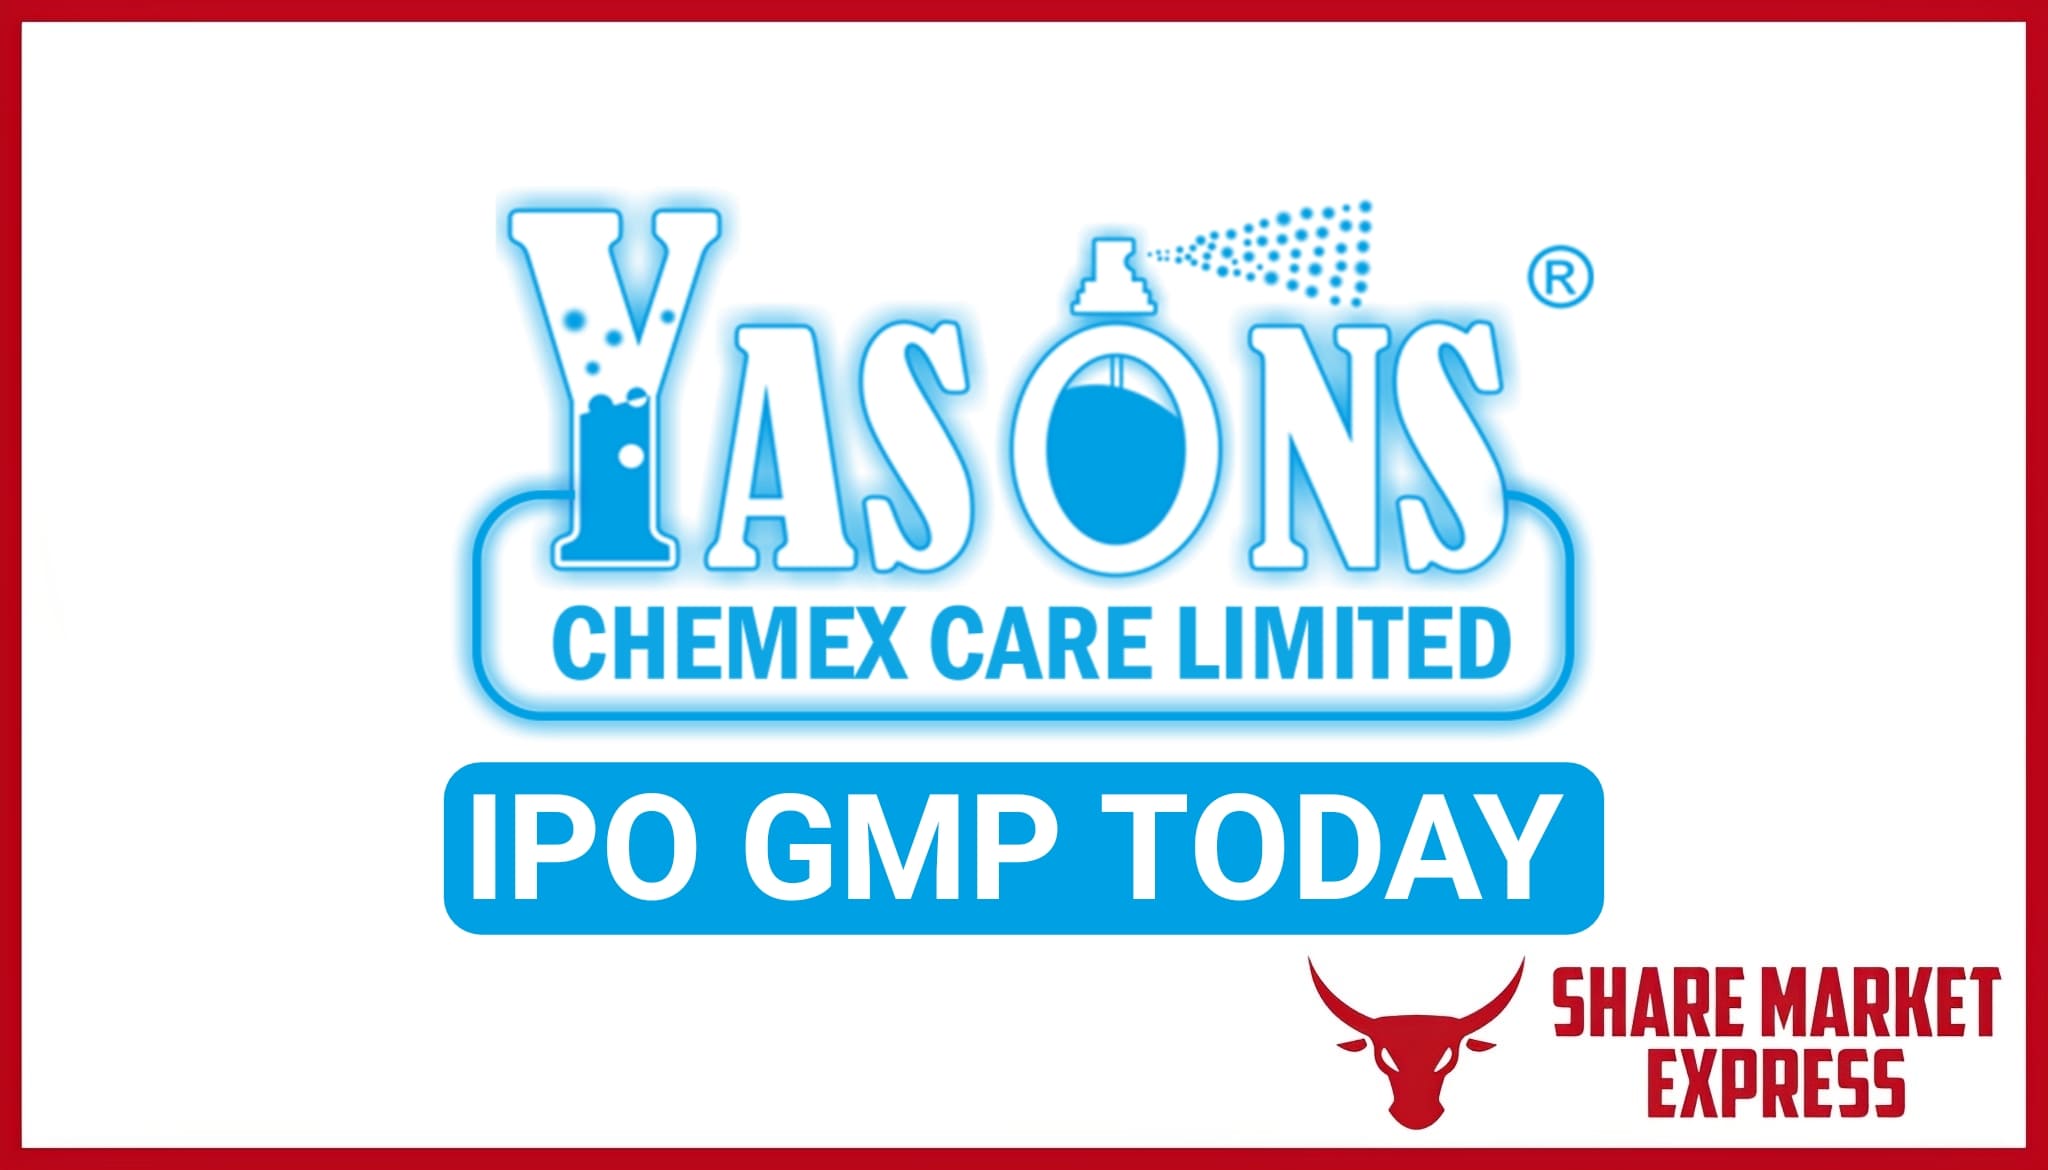 Yasons Chemex Care IPO GMP Today